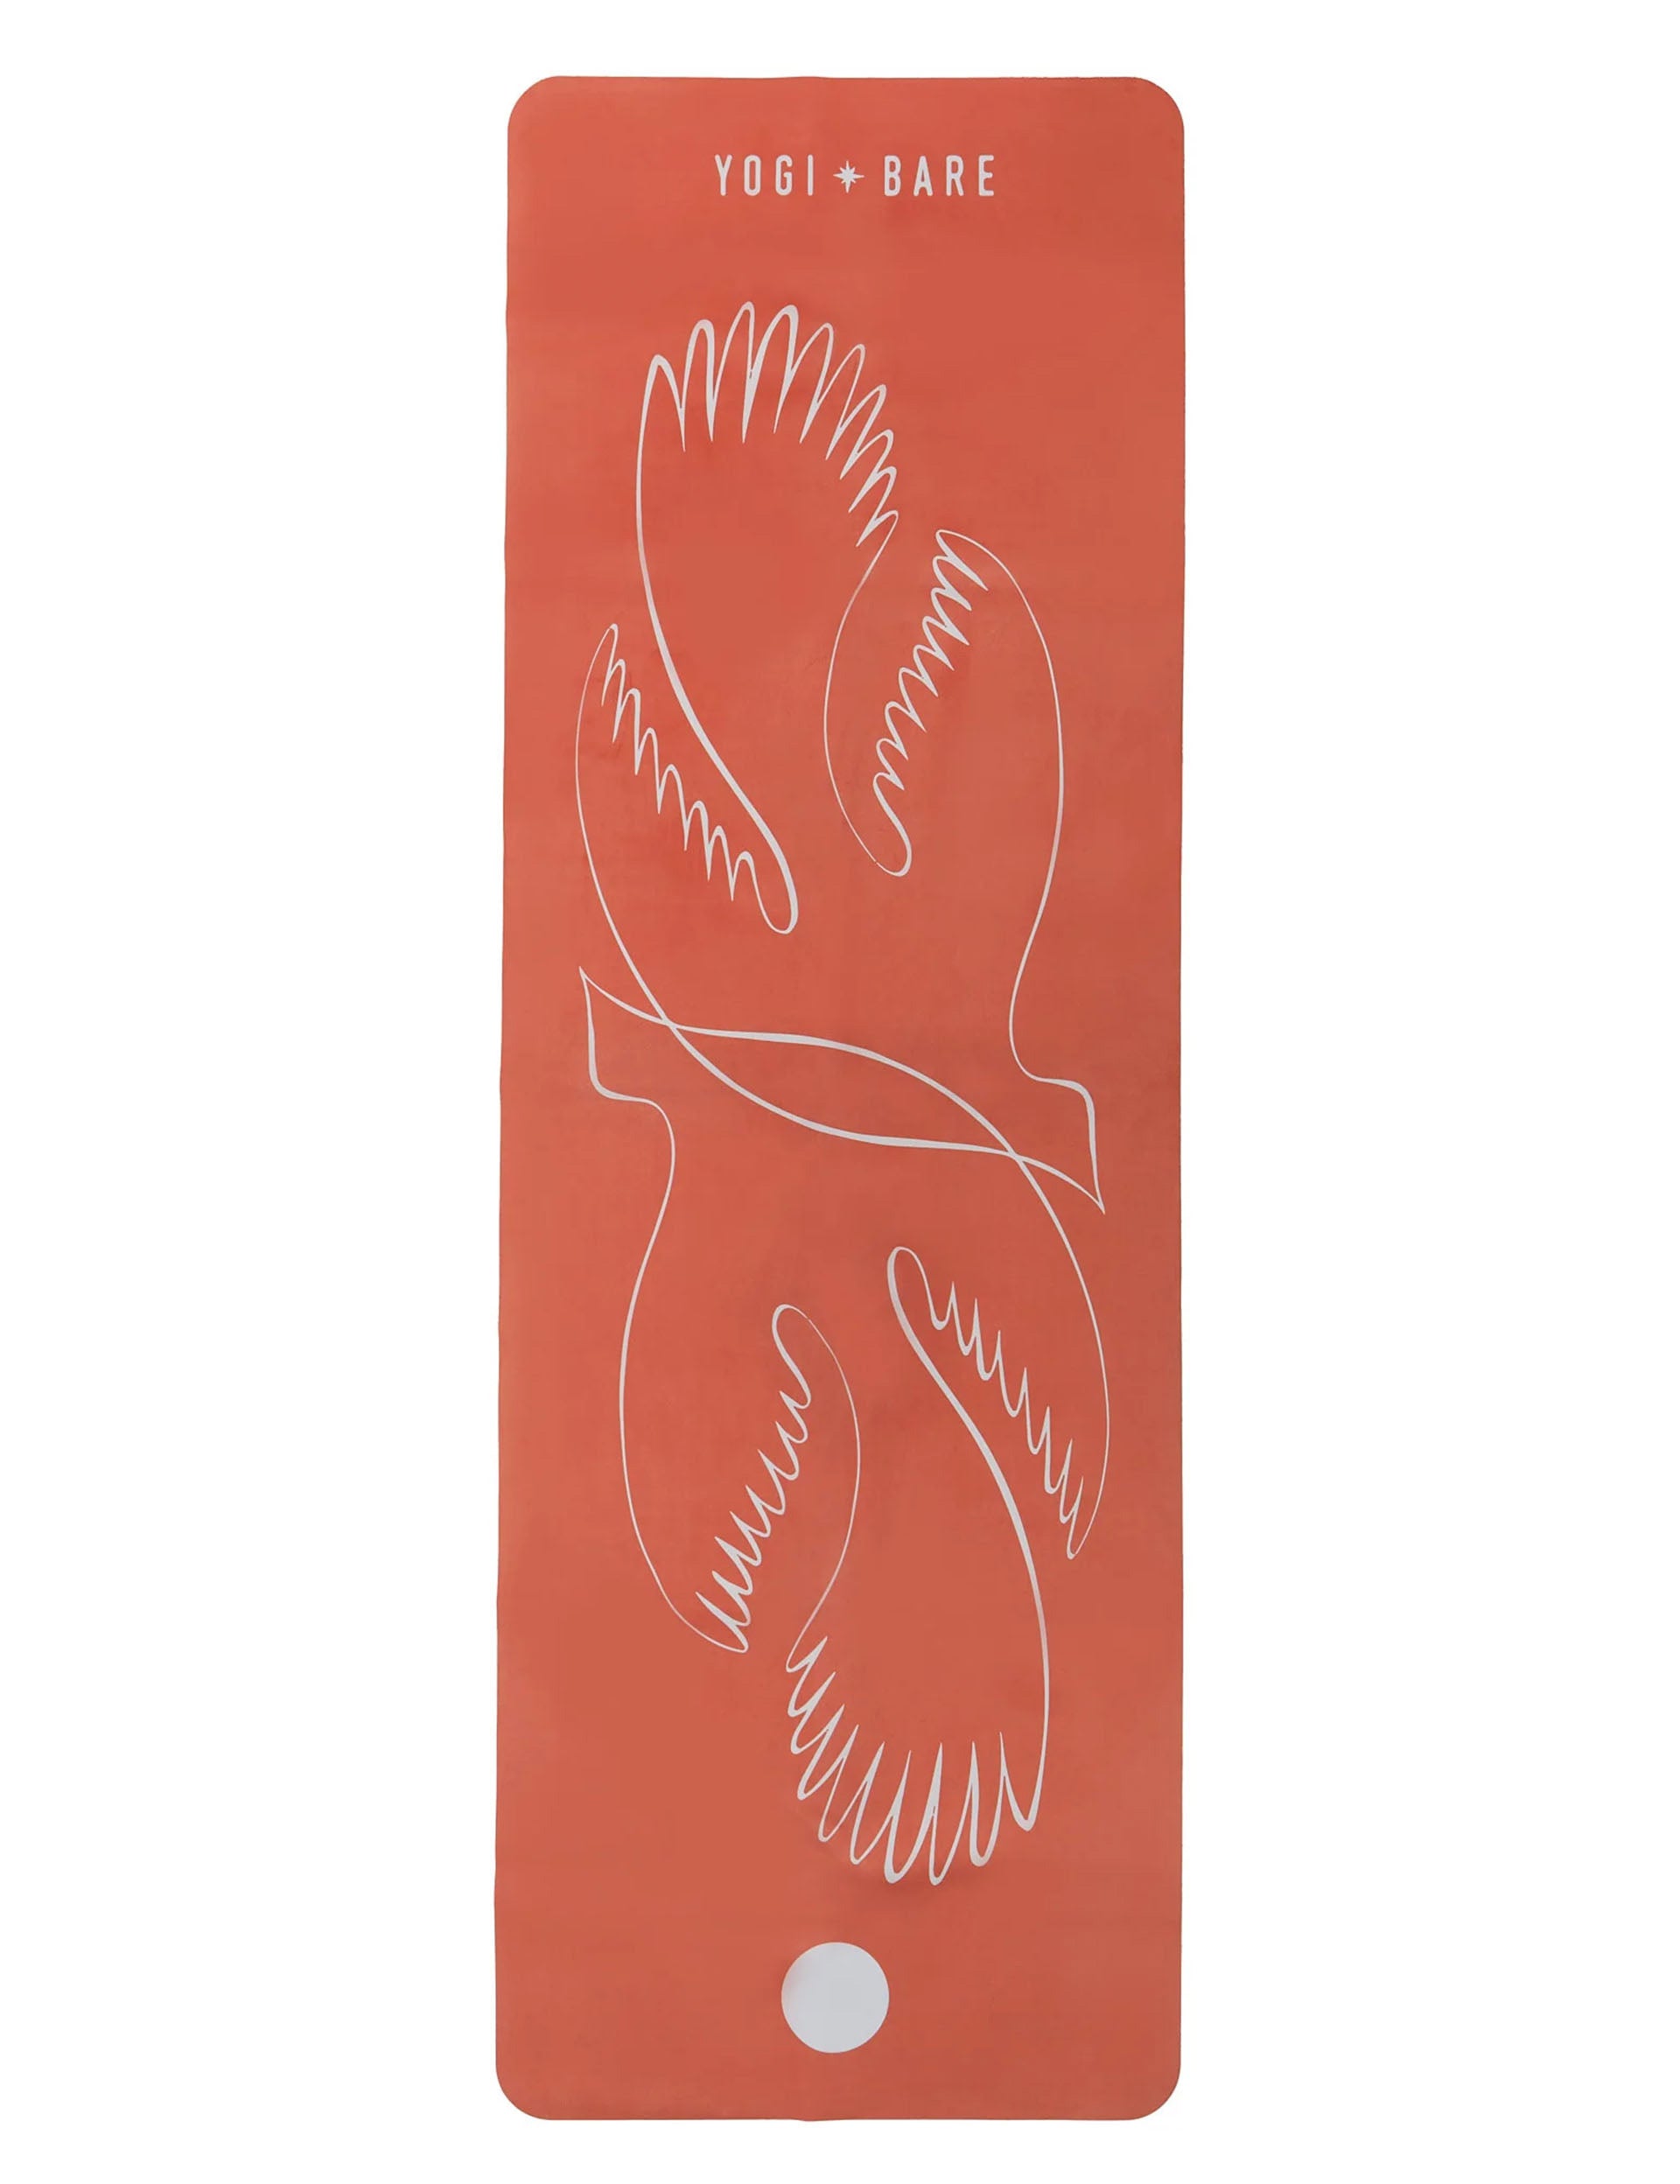 Neutral Yoga Mat Cute and Functional Design Eco-friendly and Non-slip  Perfect for Home or Studio Practice 